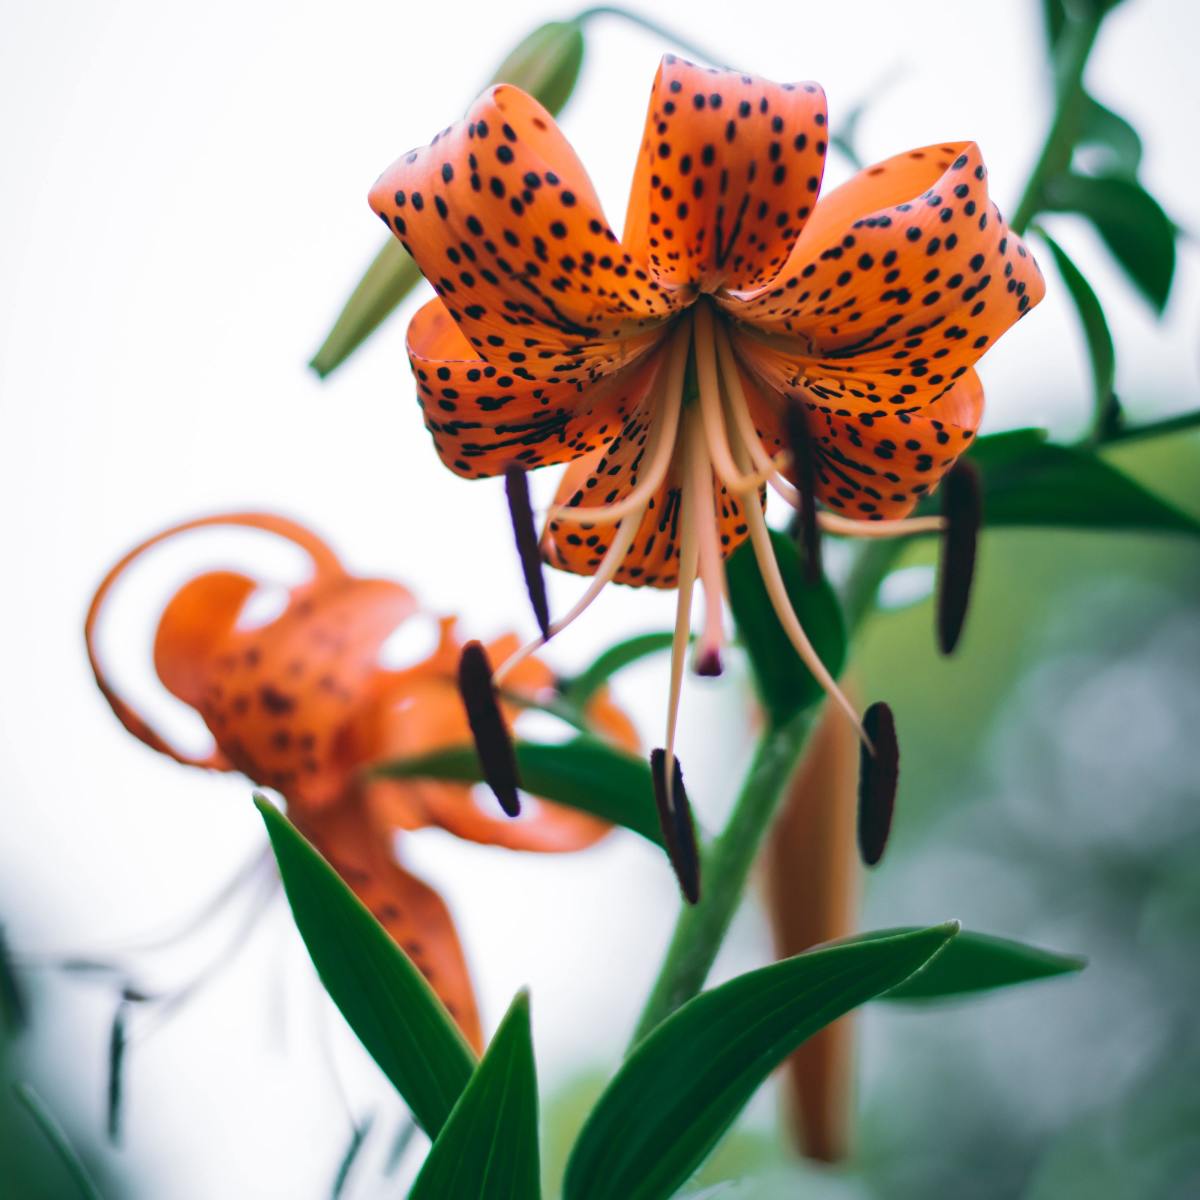 Tiger lilies are easy and fun to propagate from bulbils. Here's how!